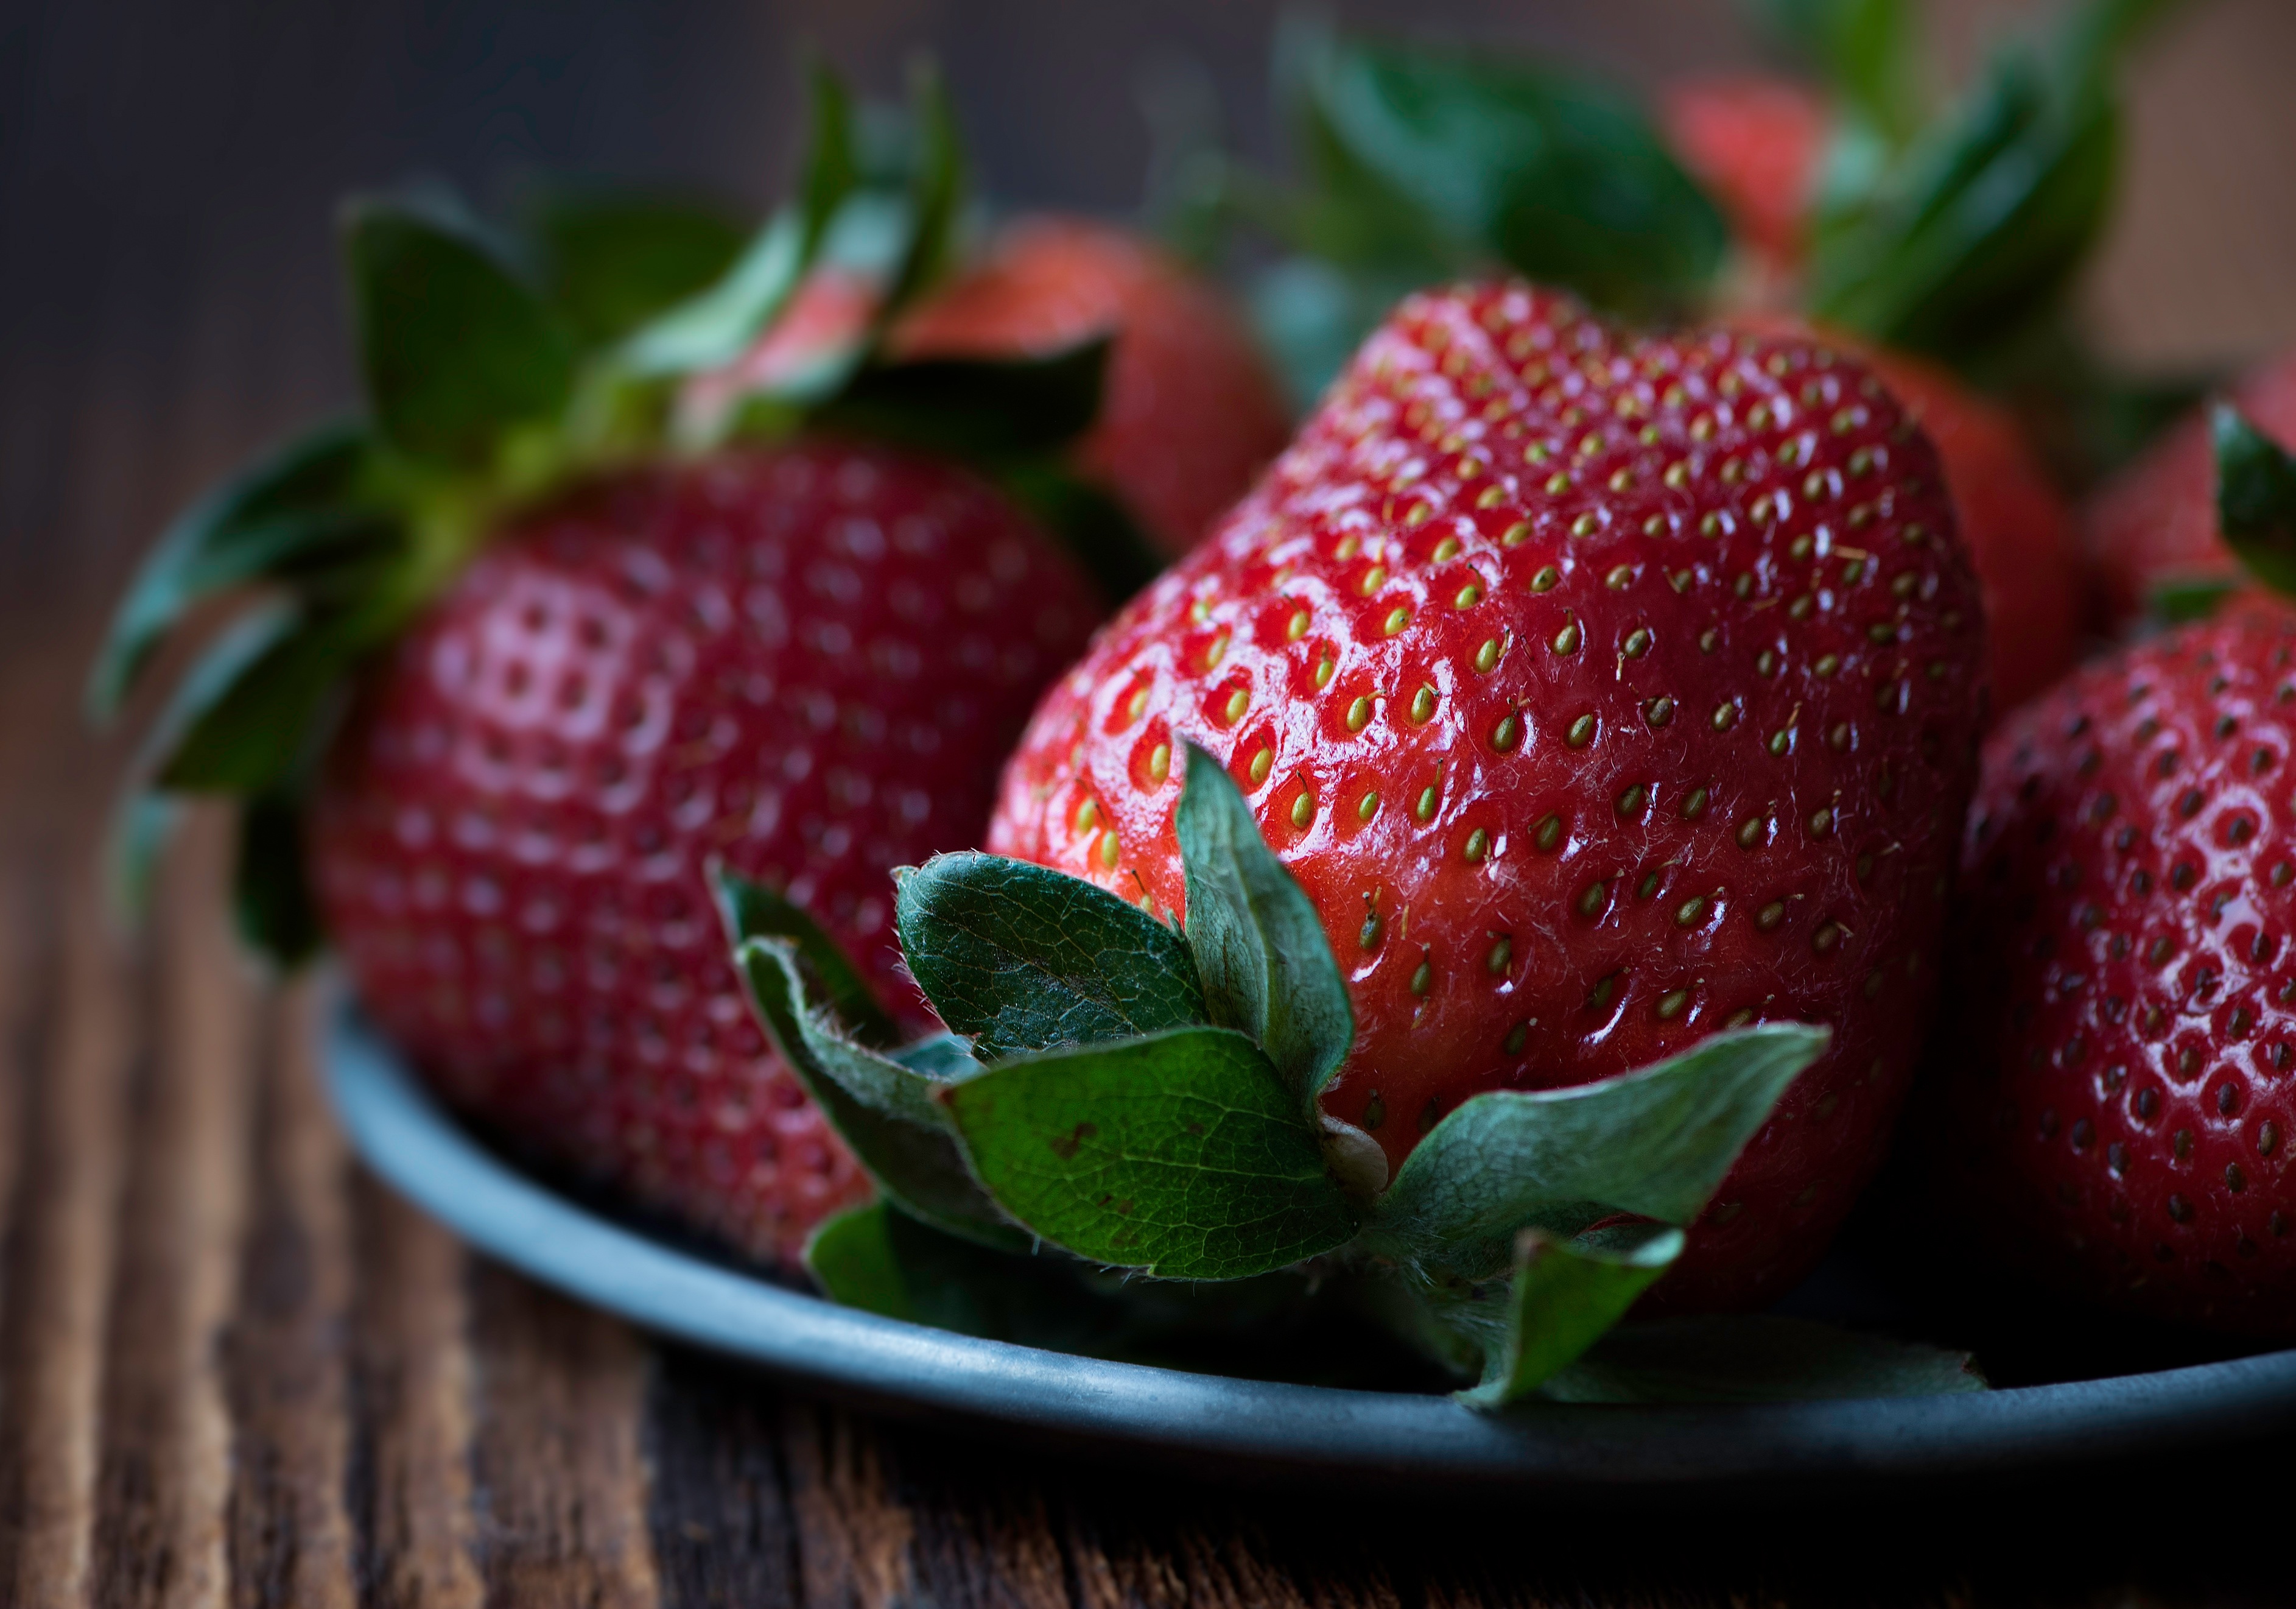 Best Strawberry wallpapers for phone screen